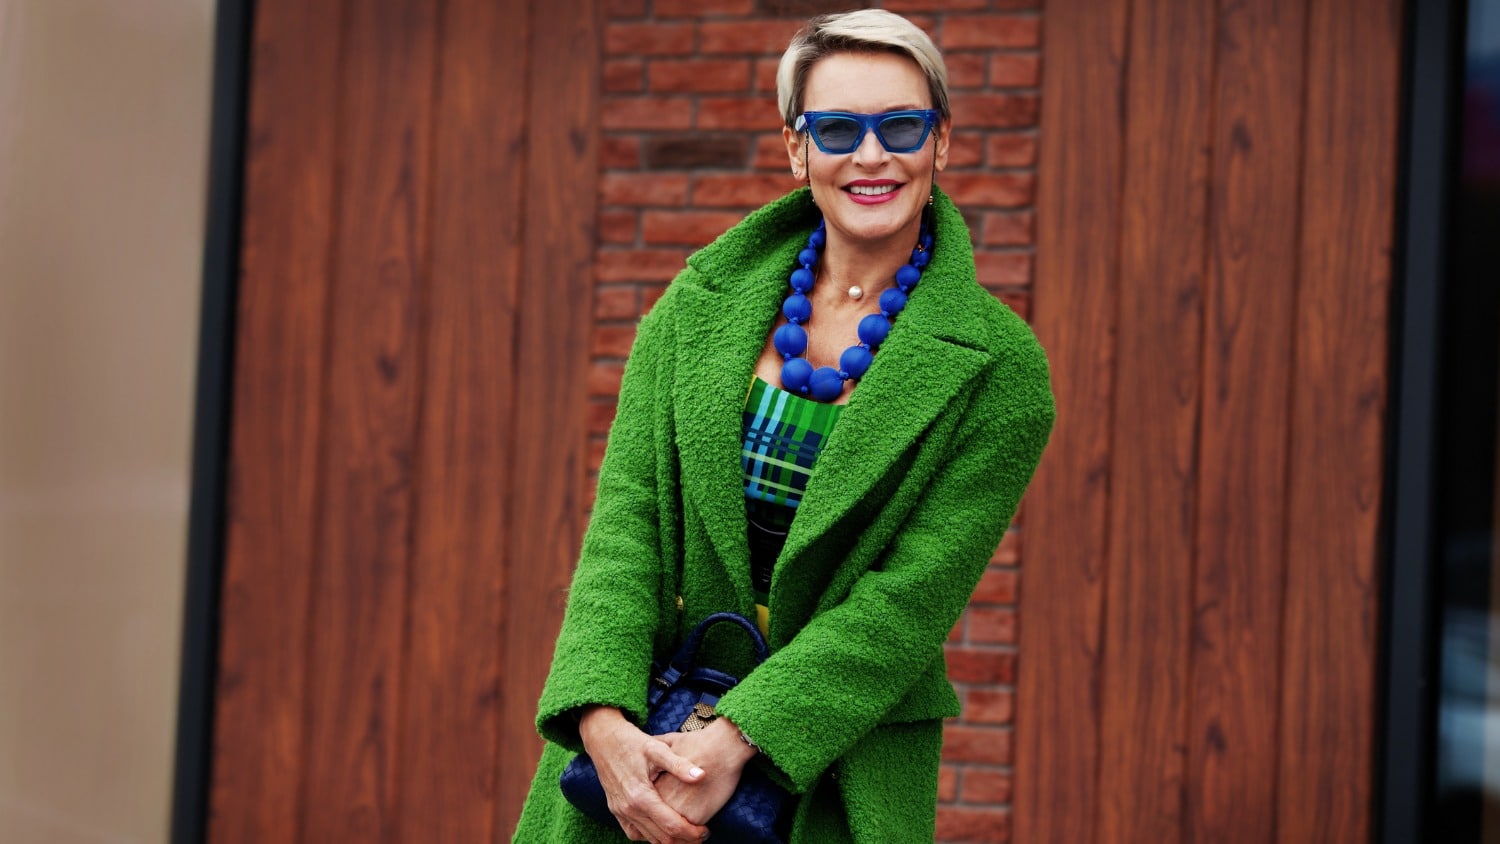 https://cdn.sixtyandme.com/wp-content/uploads/2022/04/Sixty-and-Me_Fashion-Over-50-Our-25-Favorite-Fashion-Bloggers-You-Should-Follow.jpg